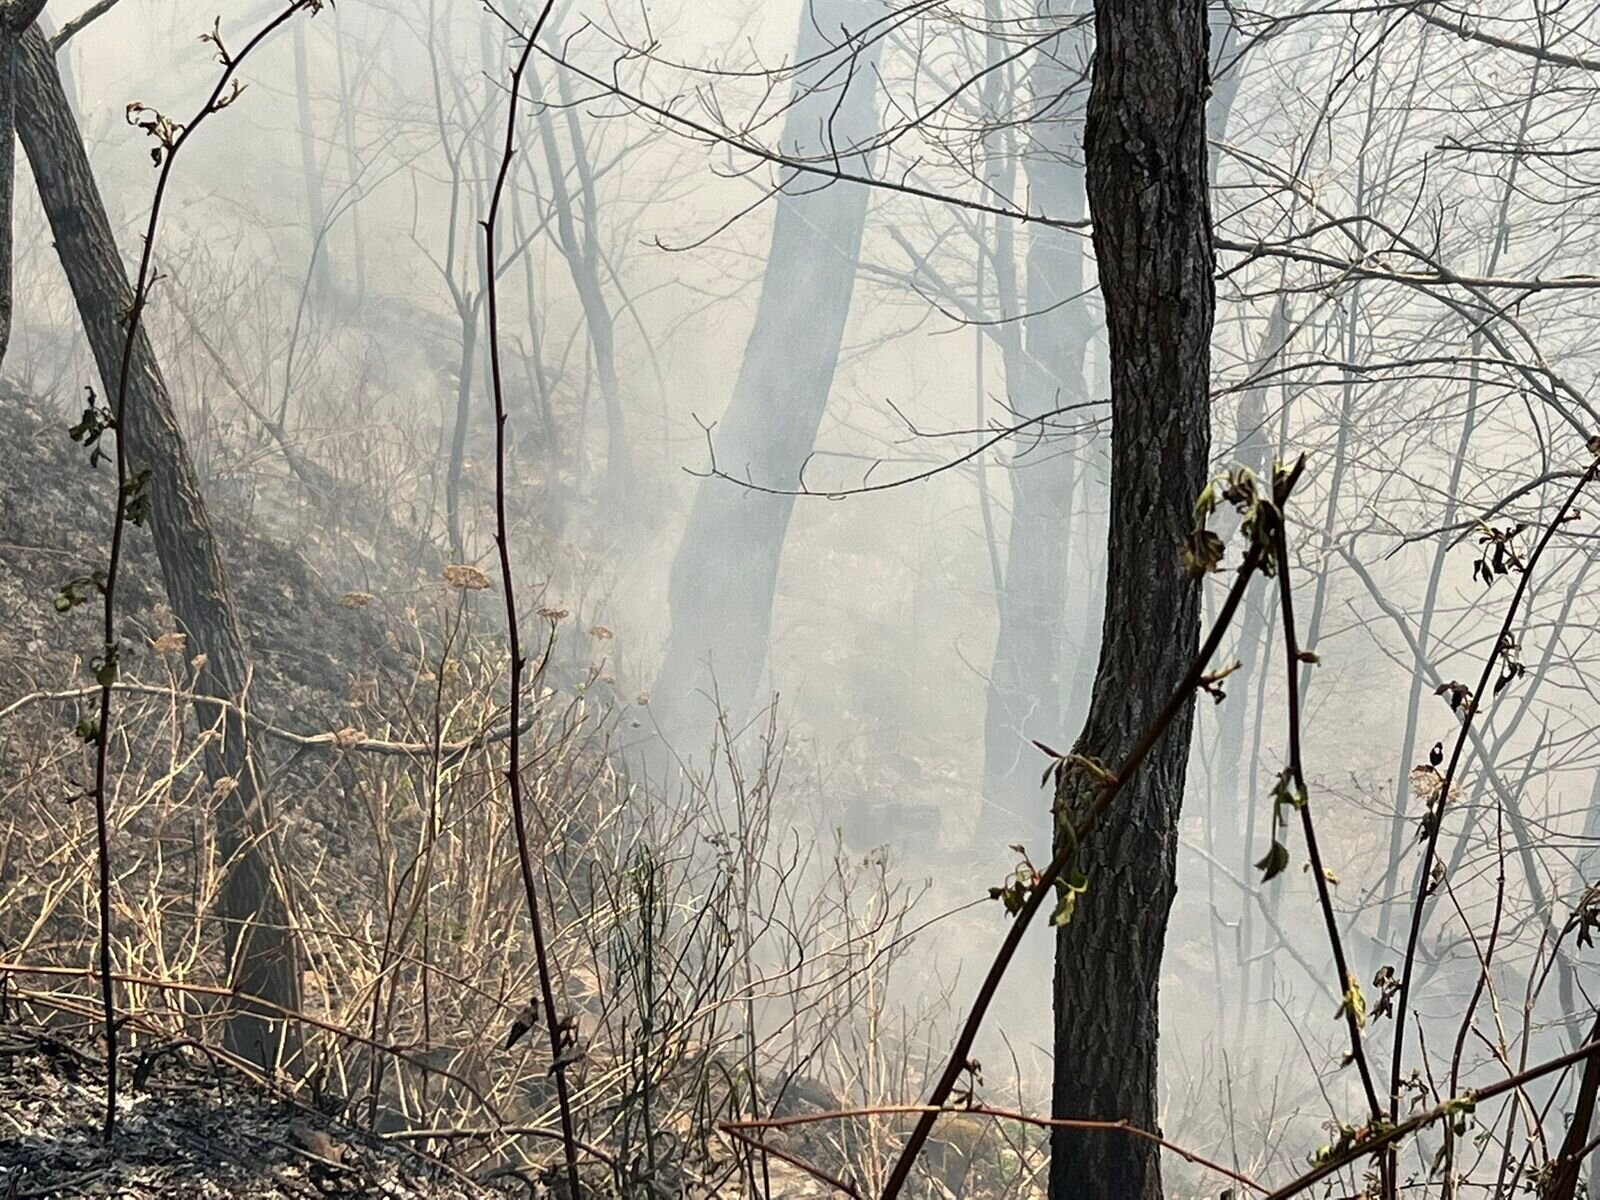 North Carolina has nearly surpassed number of fires, acres burned in all of 2021 – WWAYTV3